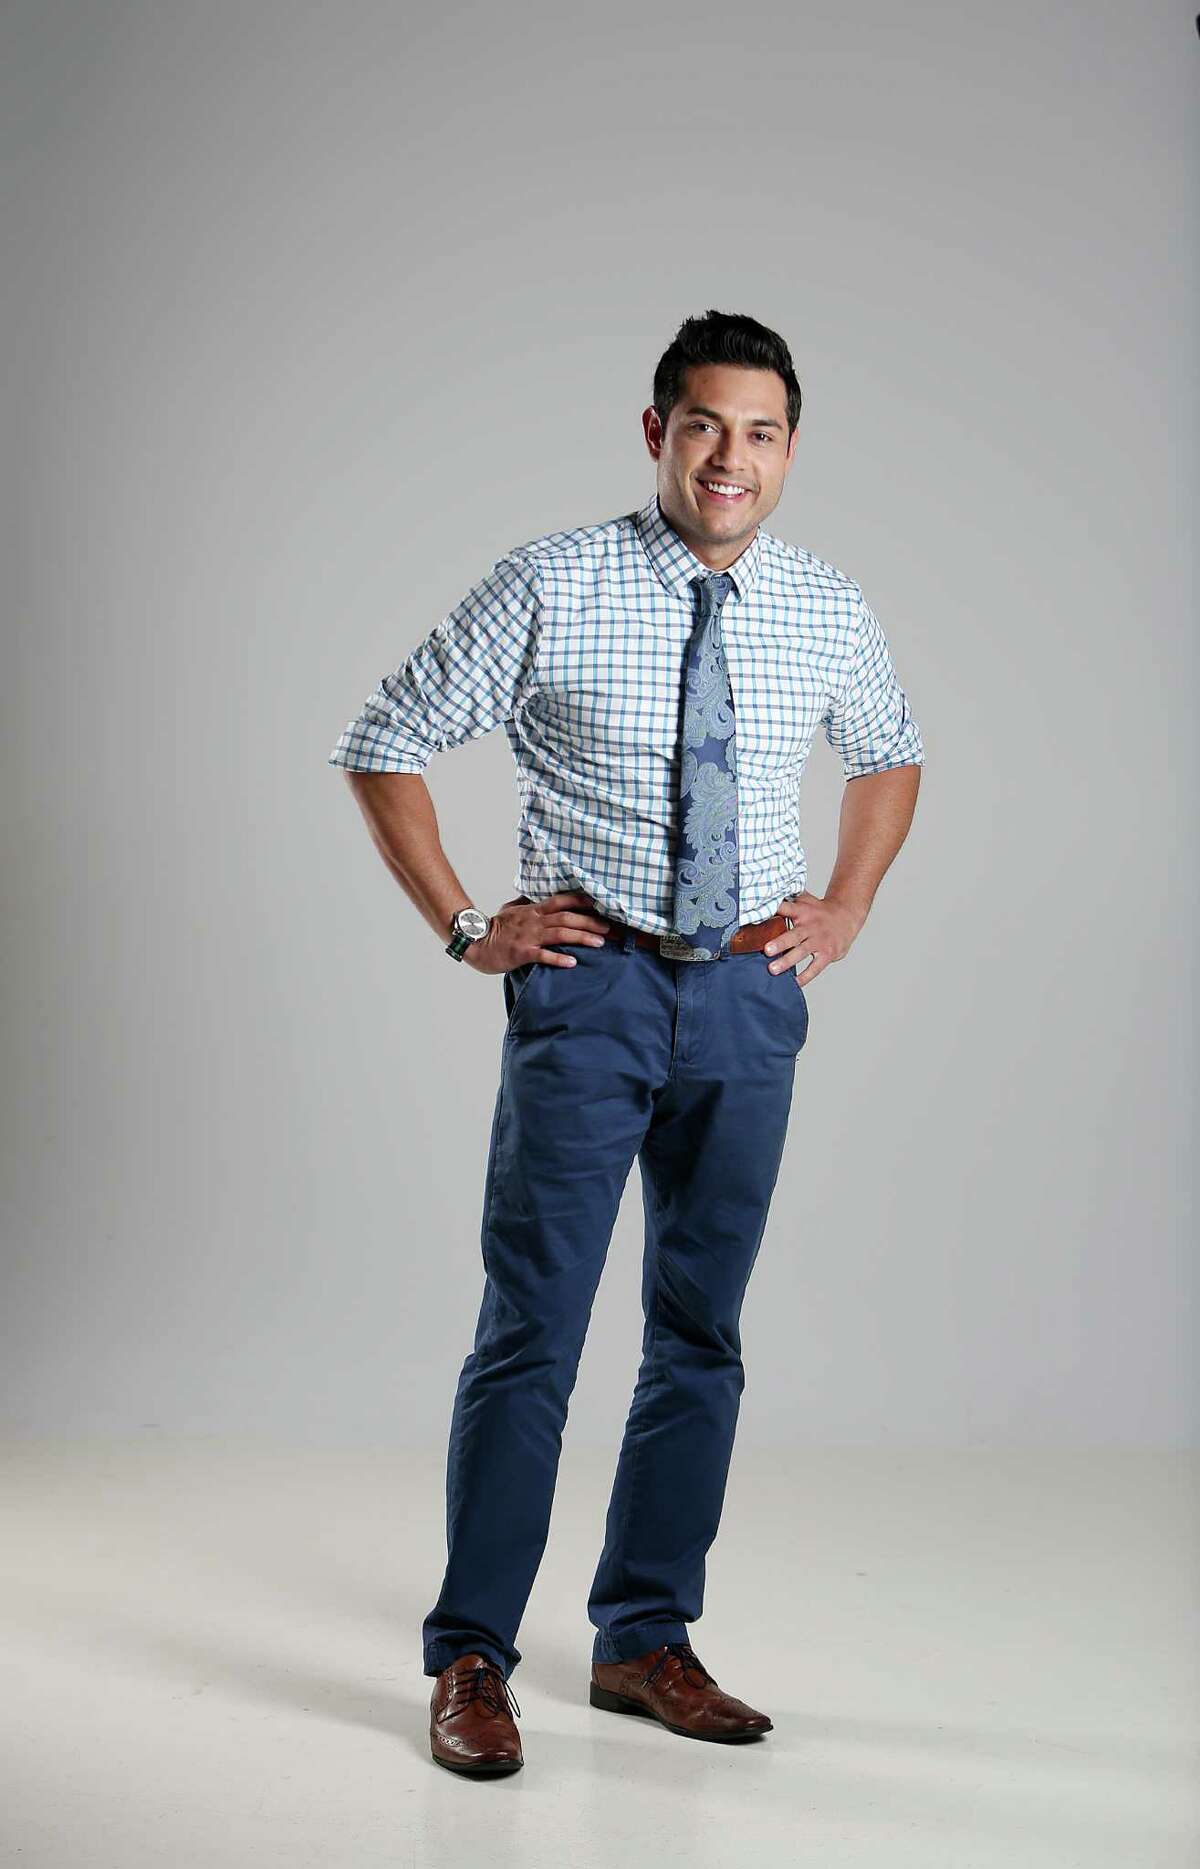 KPRC Ch. 2 TV reporter Phillip Mena is photographed in the Houston Chronicle Studio on June 24, 2014, in Houston, Tx. ( Mayra Beltran / Houston Chronicle )